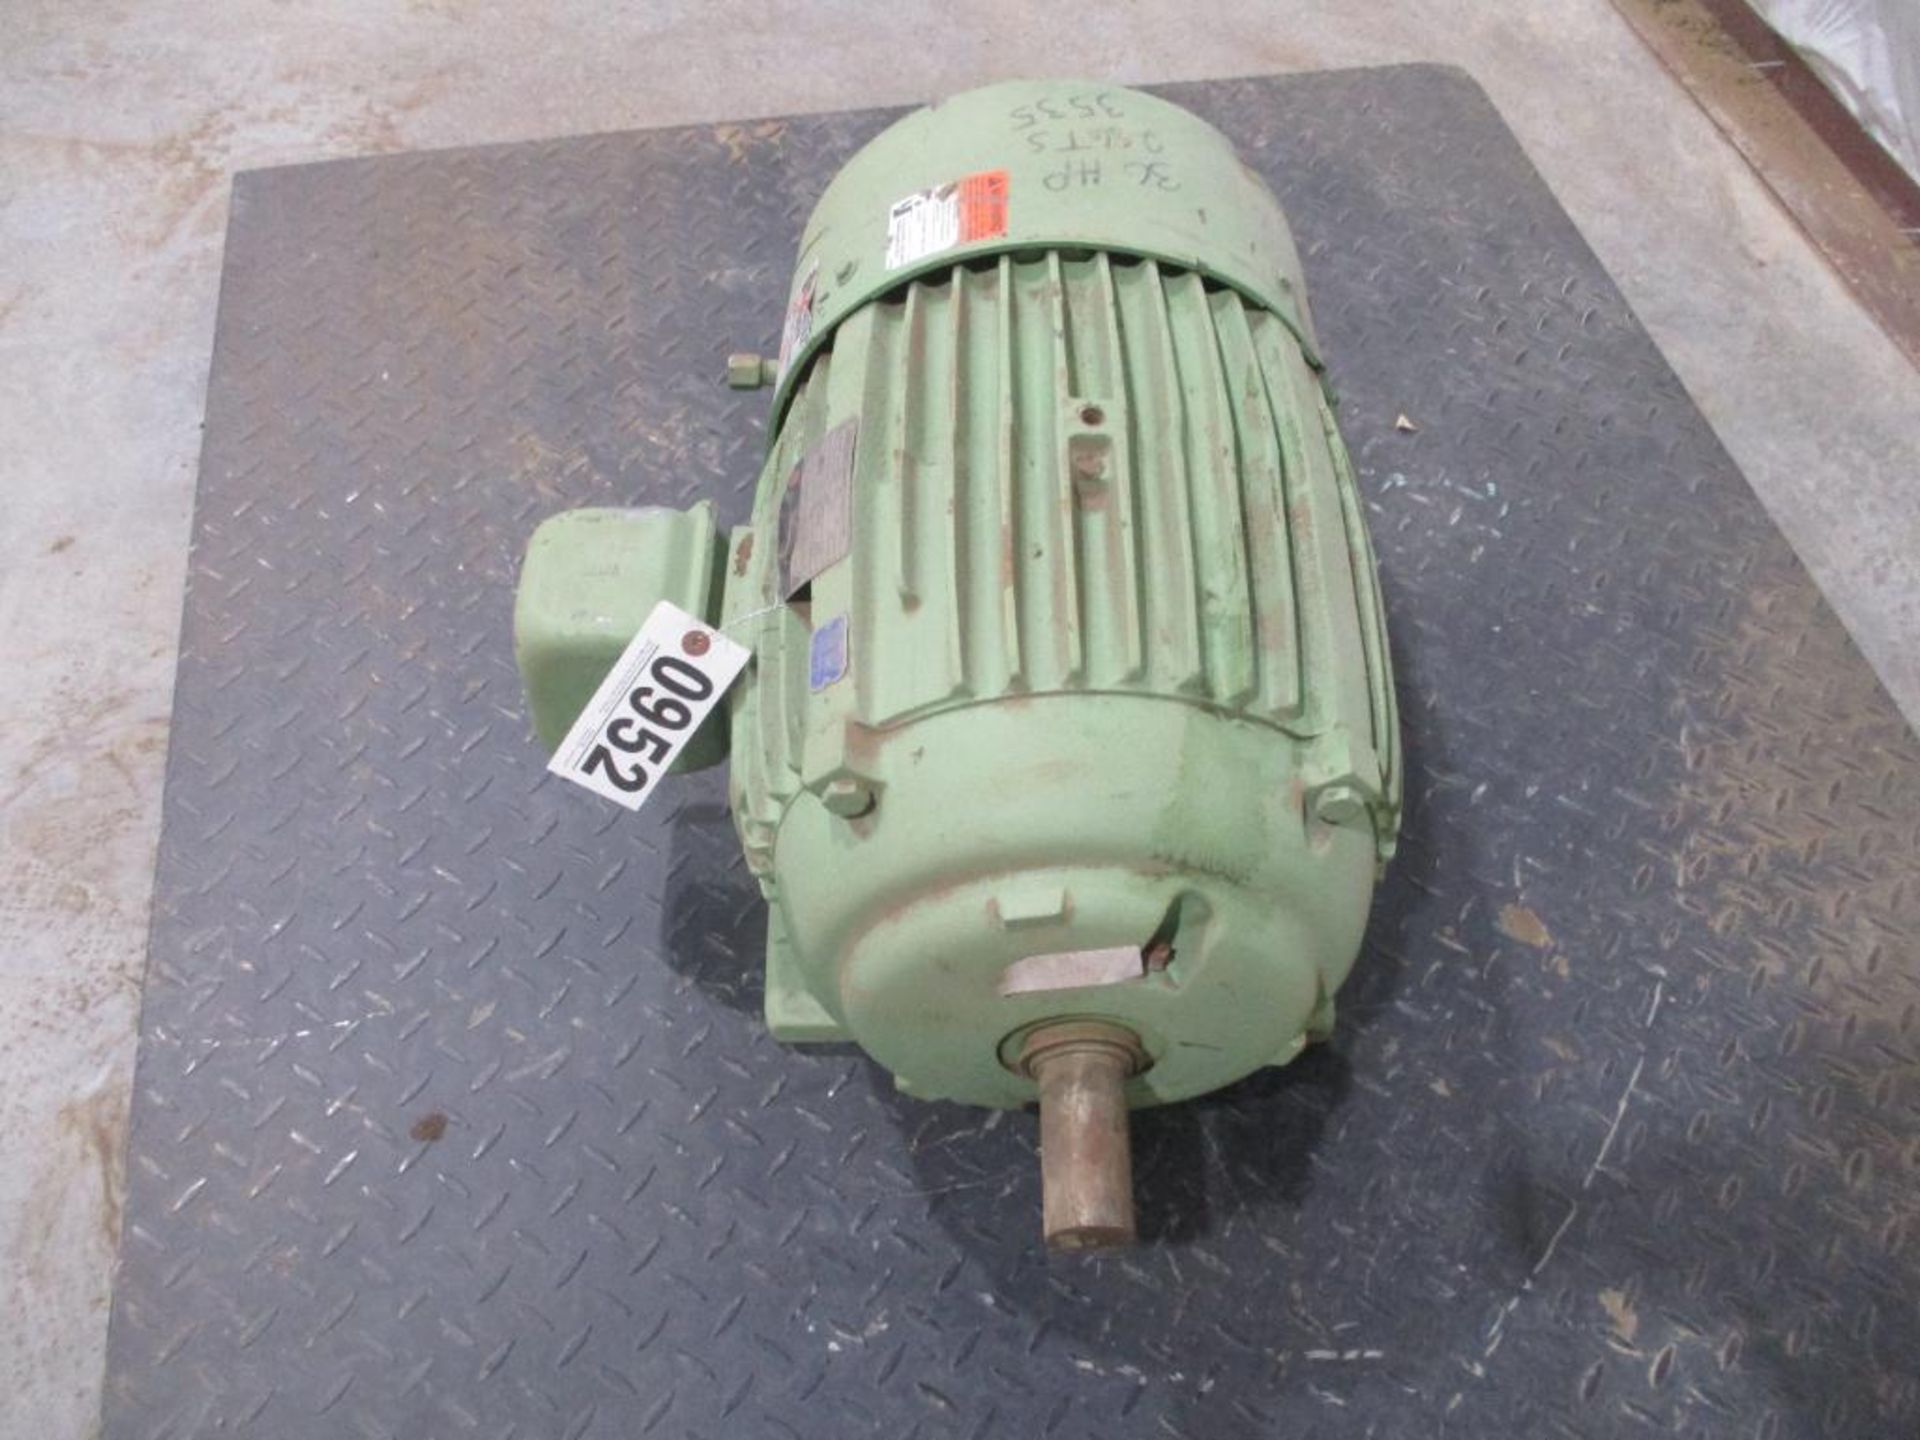 US MOTORS 3 PHASE 30HP 3535RPM 286TS FRAME A/C MOTOR P/N 5412-50-XDBX117303R, 341# lbs (There will b - Image 2 of 5